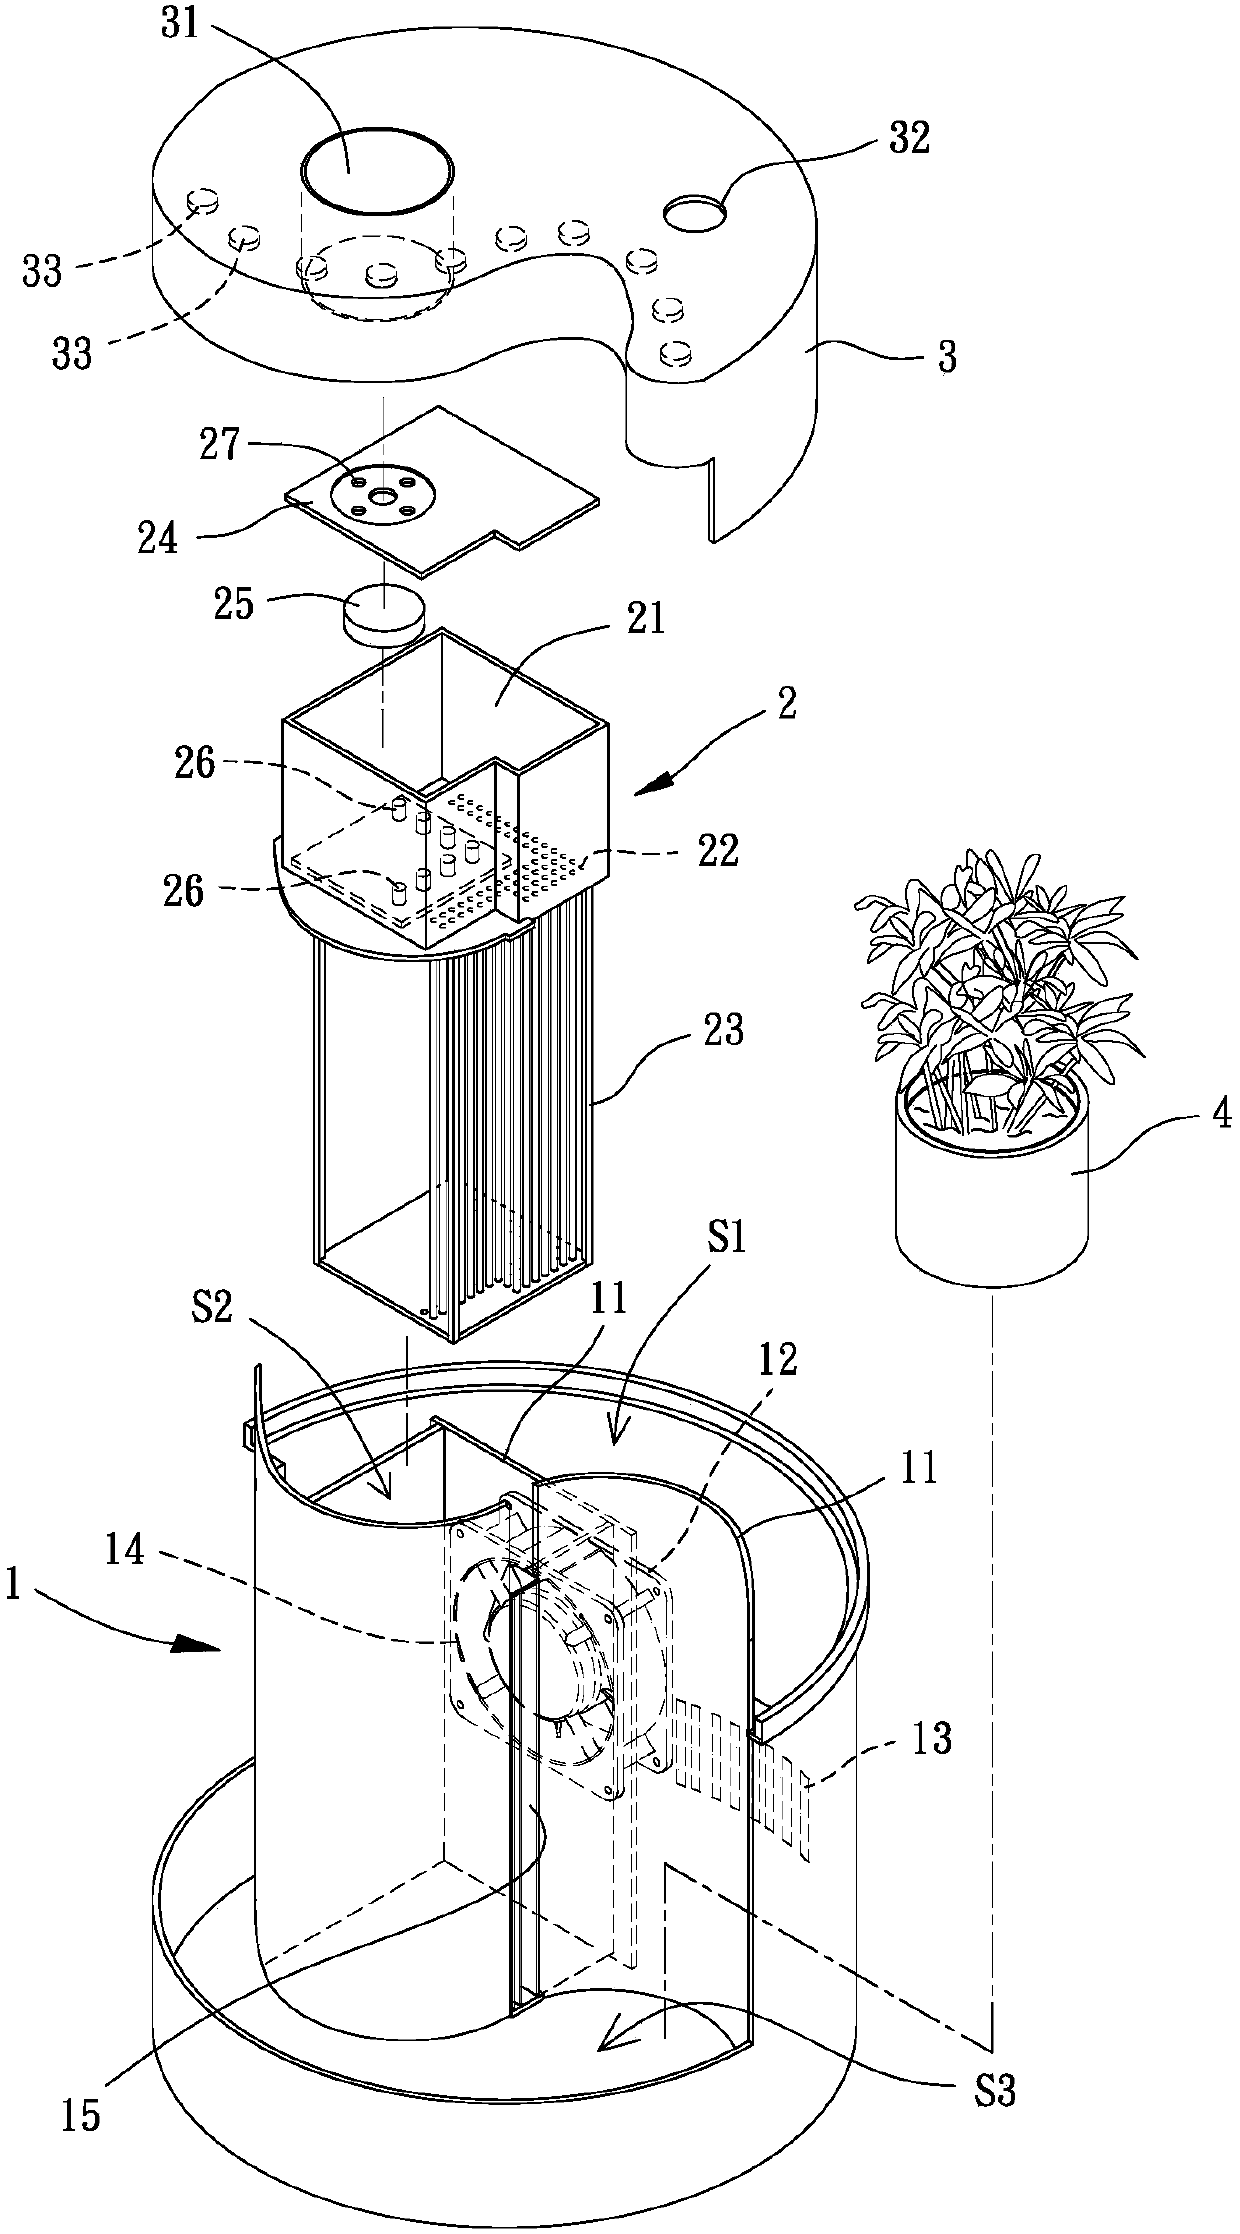 Double-filter type air purifying device